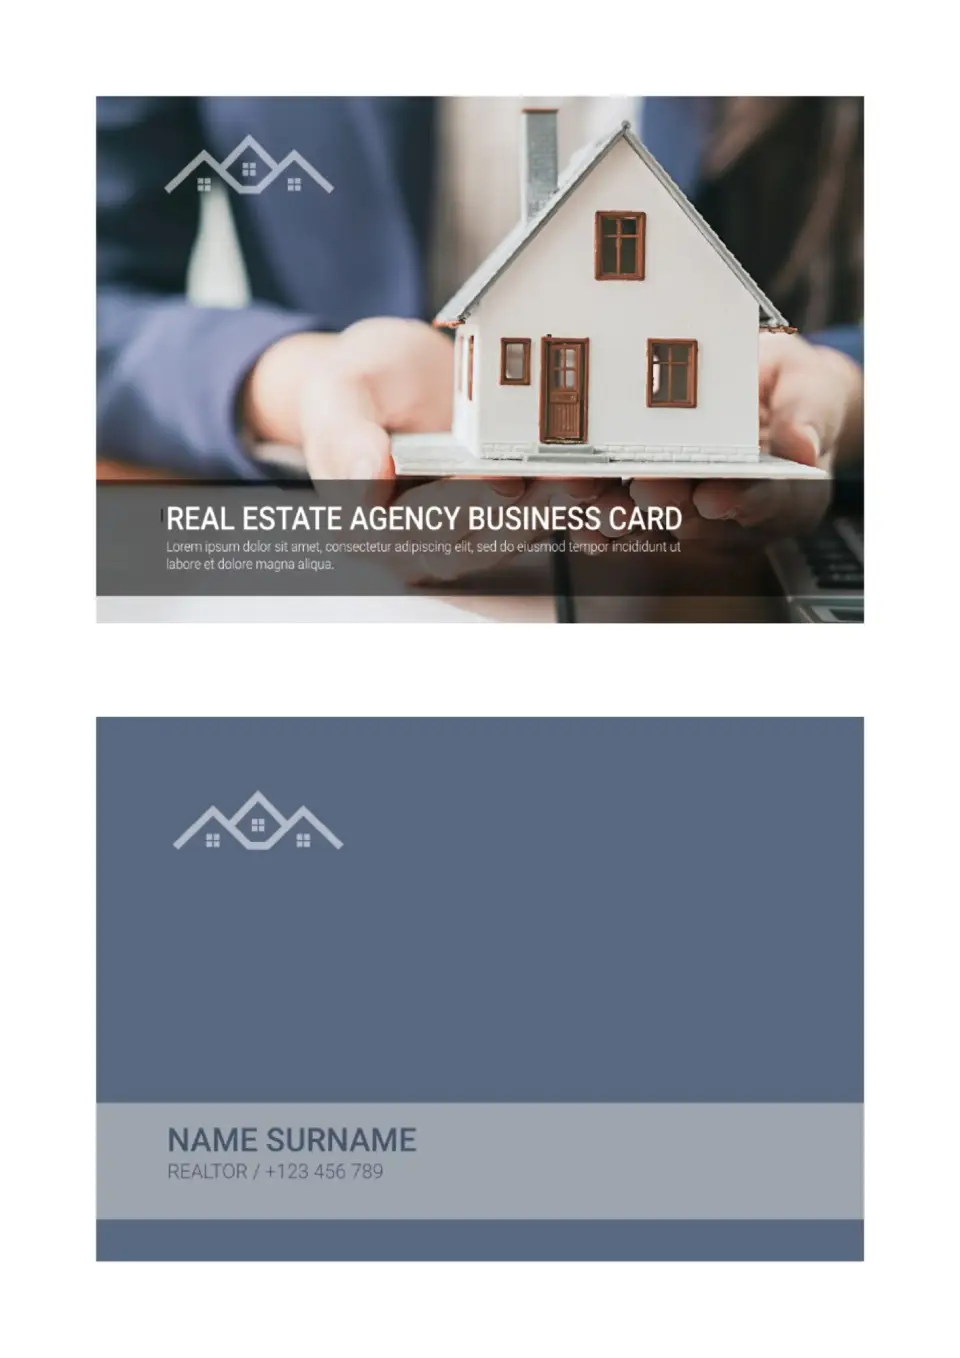 Real Estate Agency Business Card Template for Google Docs